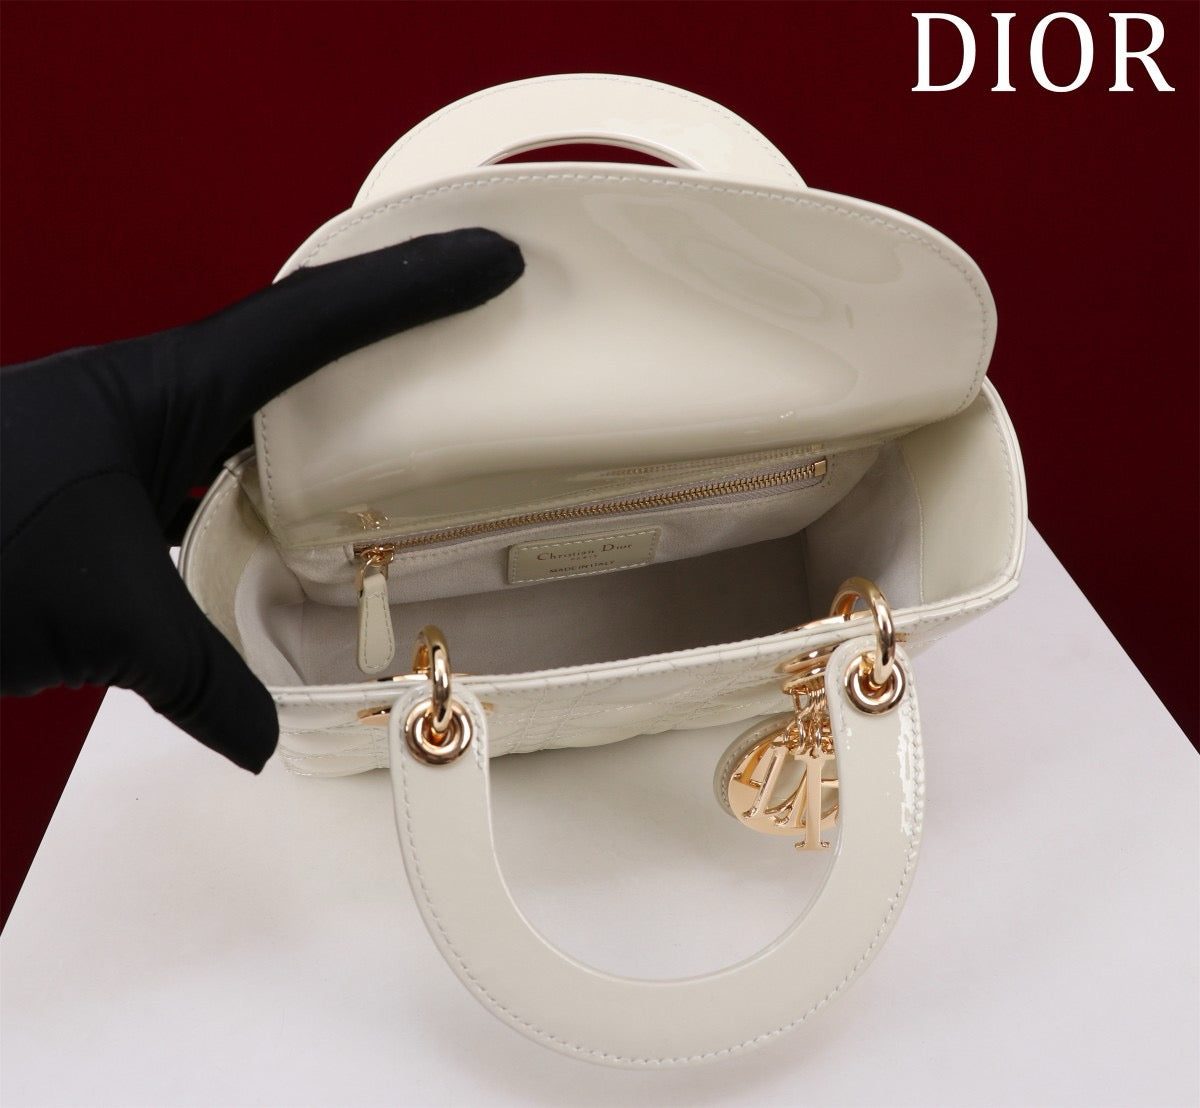 inside opening of white lady dior bag